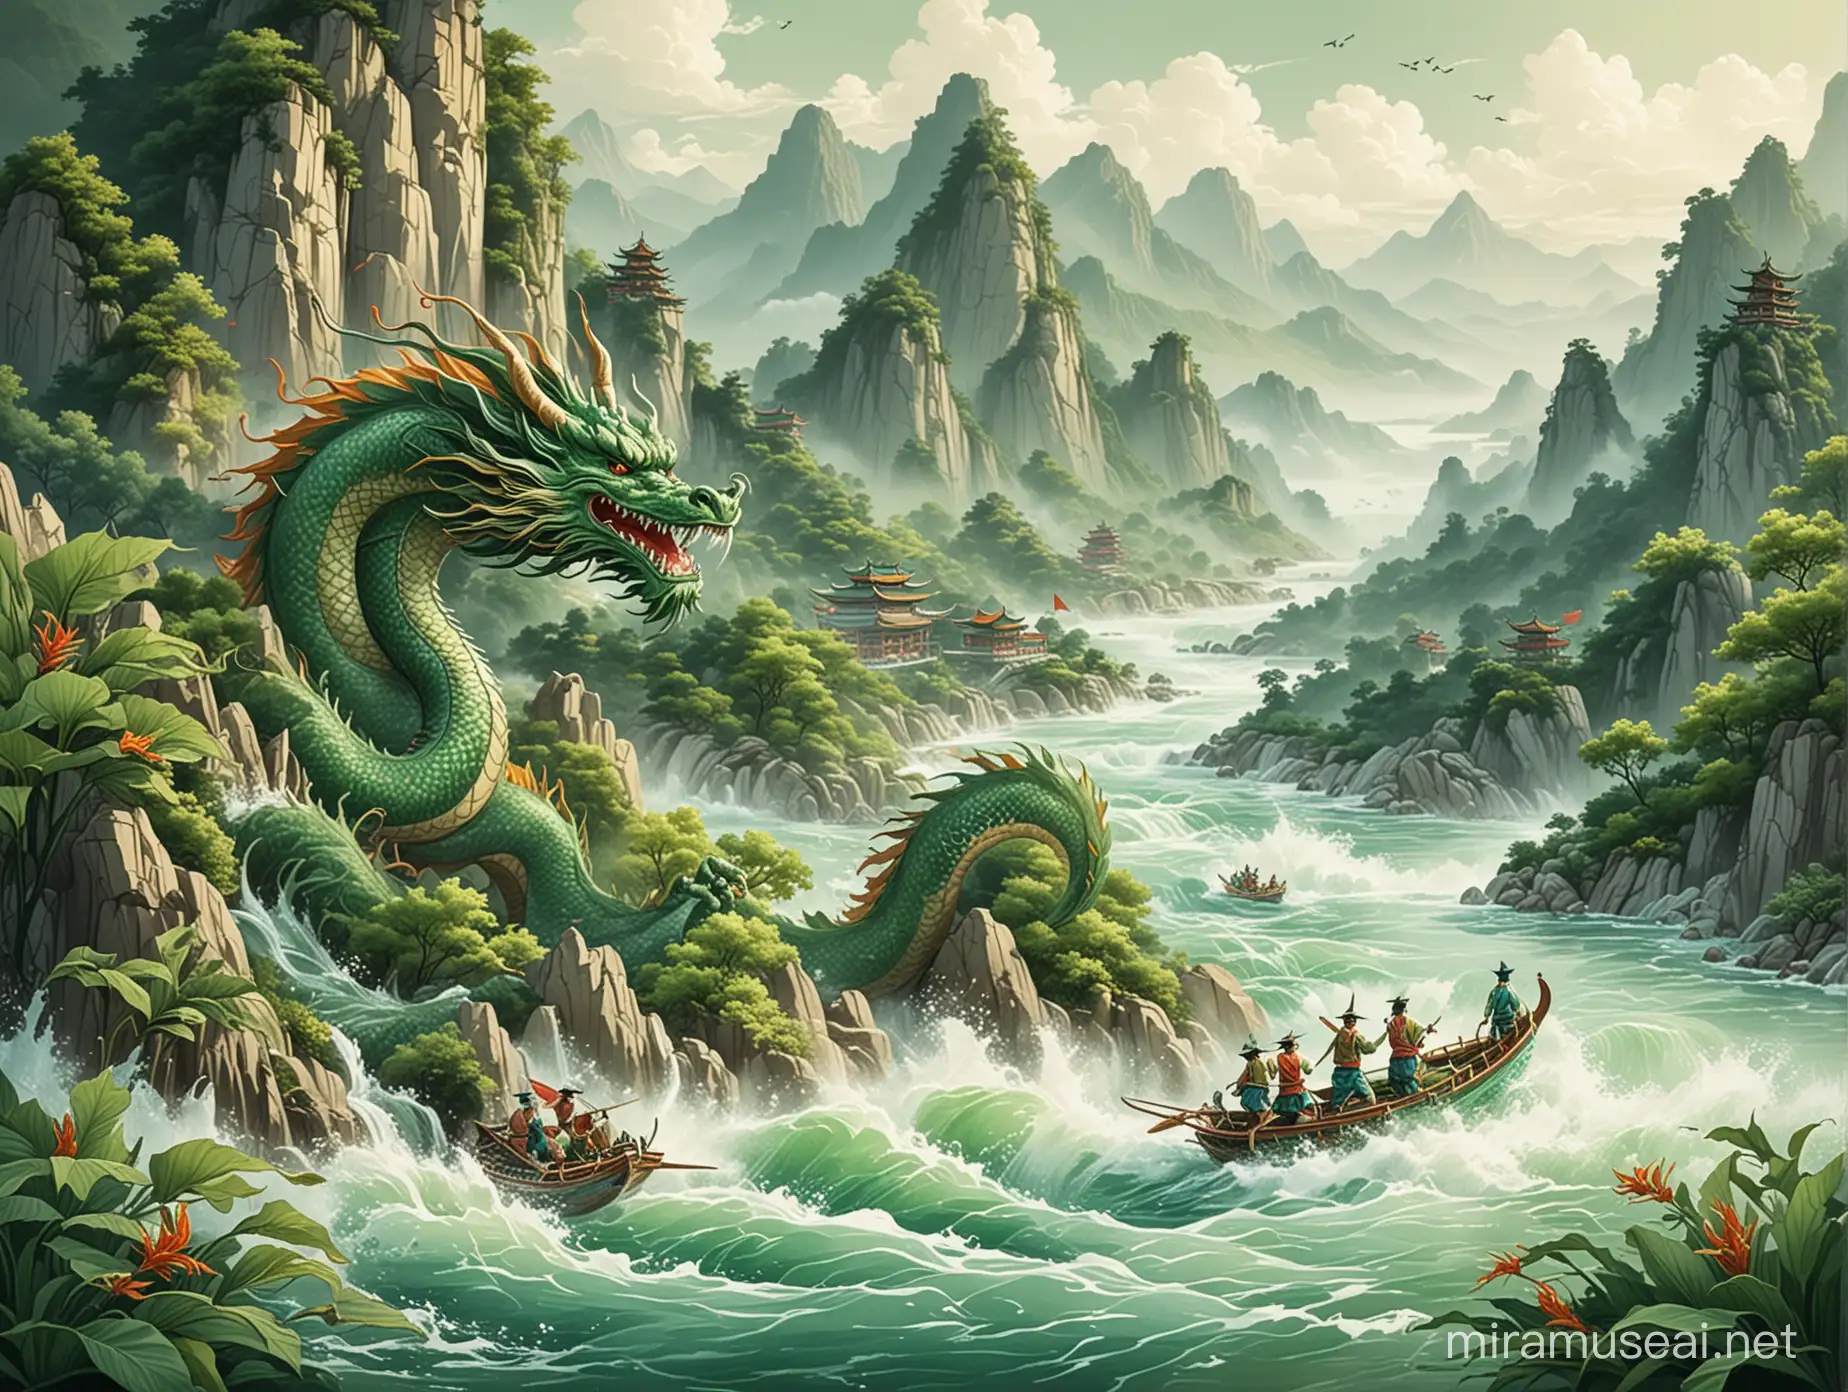 Chinese Dragon amidst Mountain Scenery Dragon Boat Racing Illustration